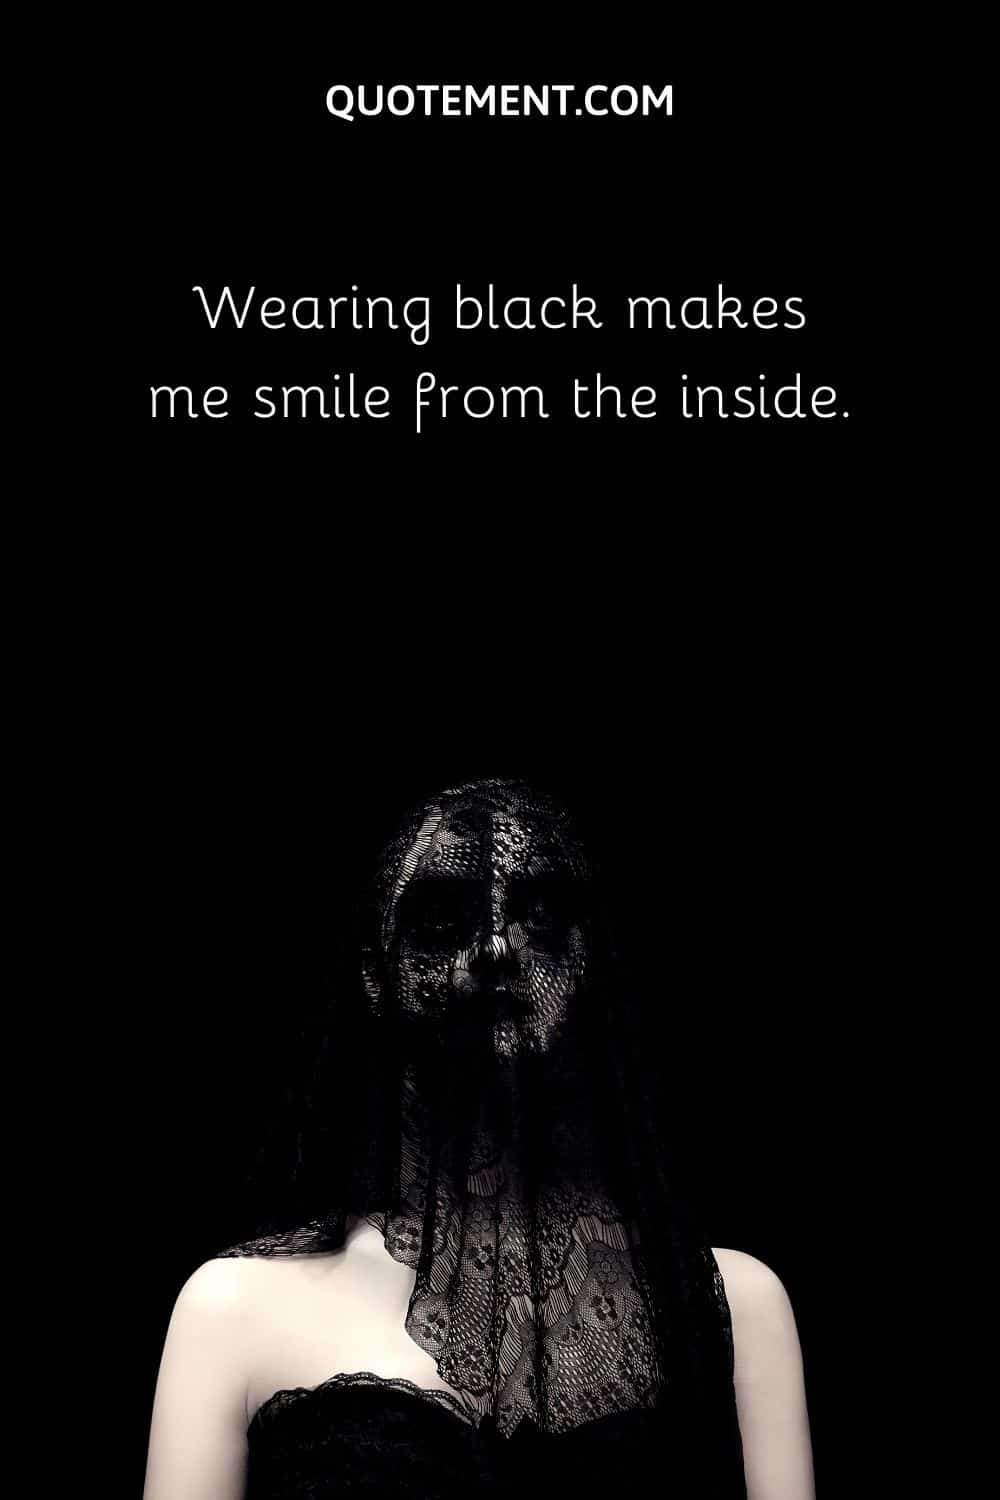 Wearing black makes me smile from the inside